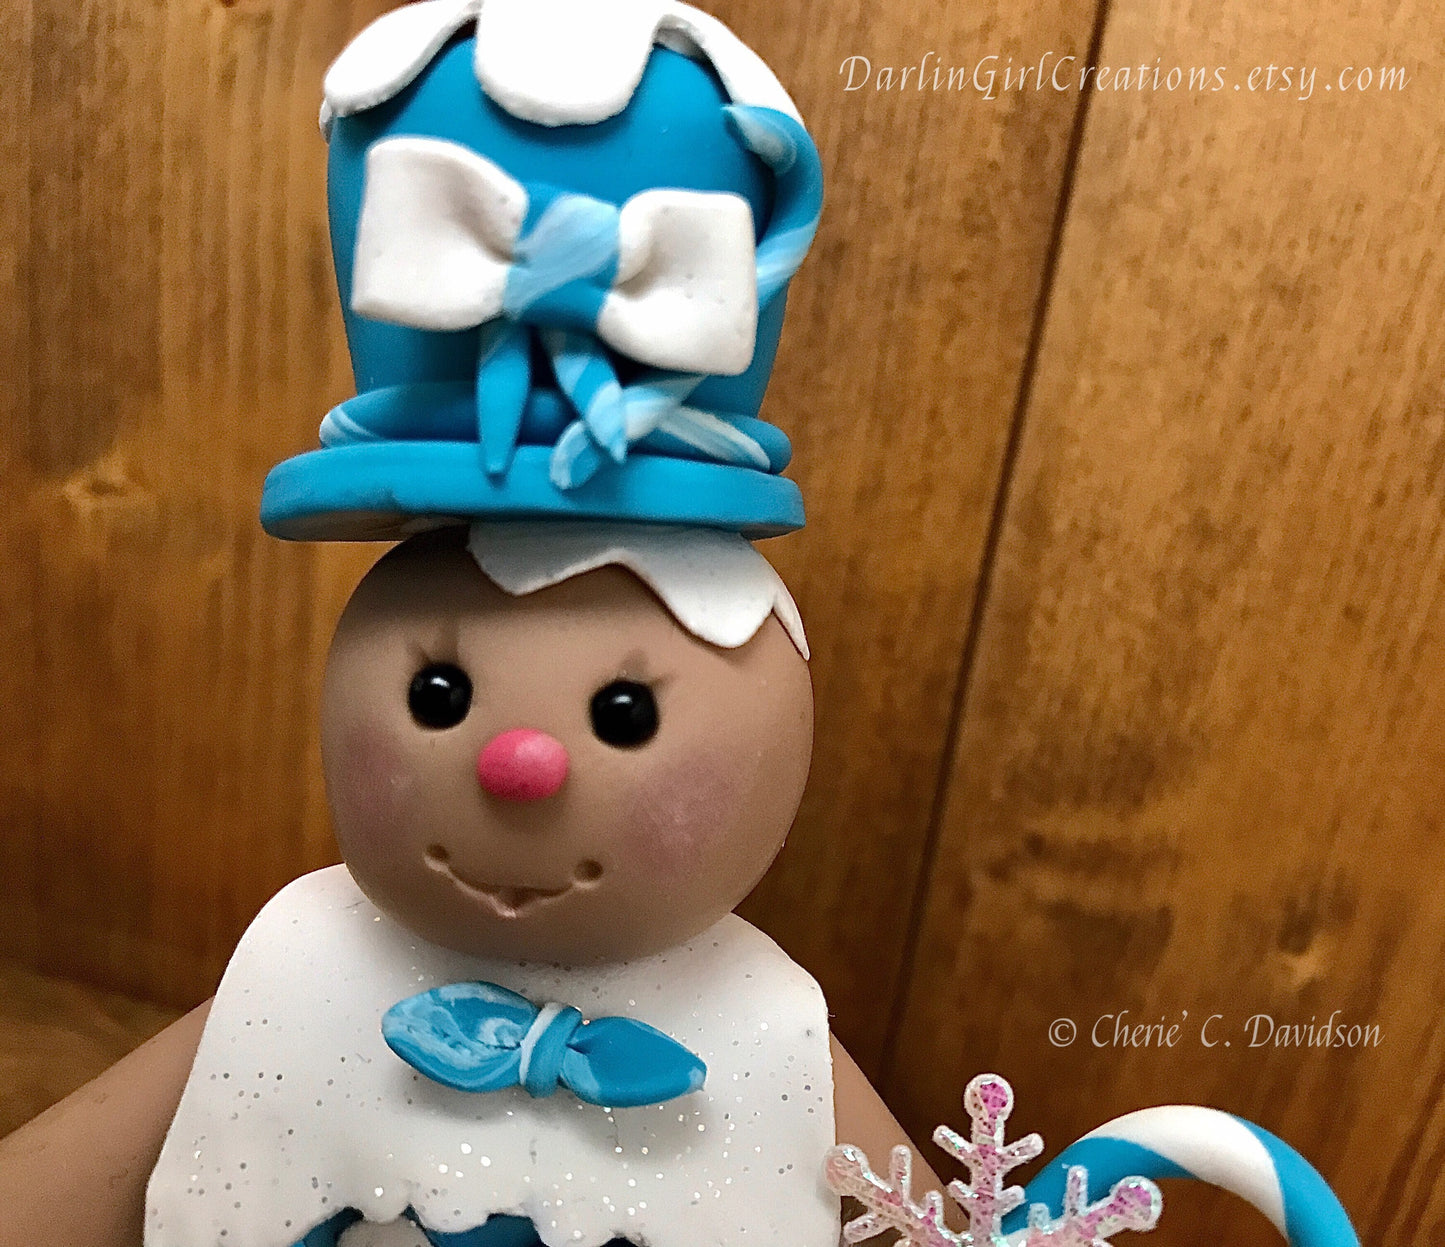 Winter Wonderland Holiday Gingy Adorable Clay Gingerbread Figure with Sparkling Snowflakes, Blue Candy Canes, Snow & Smiles